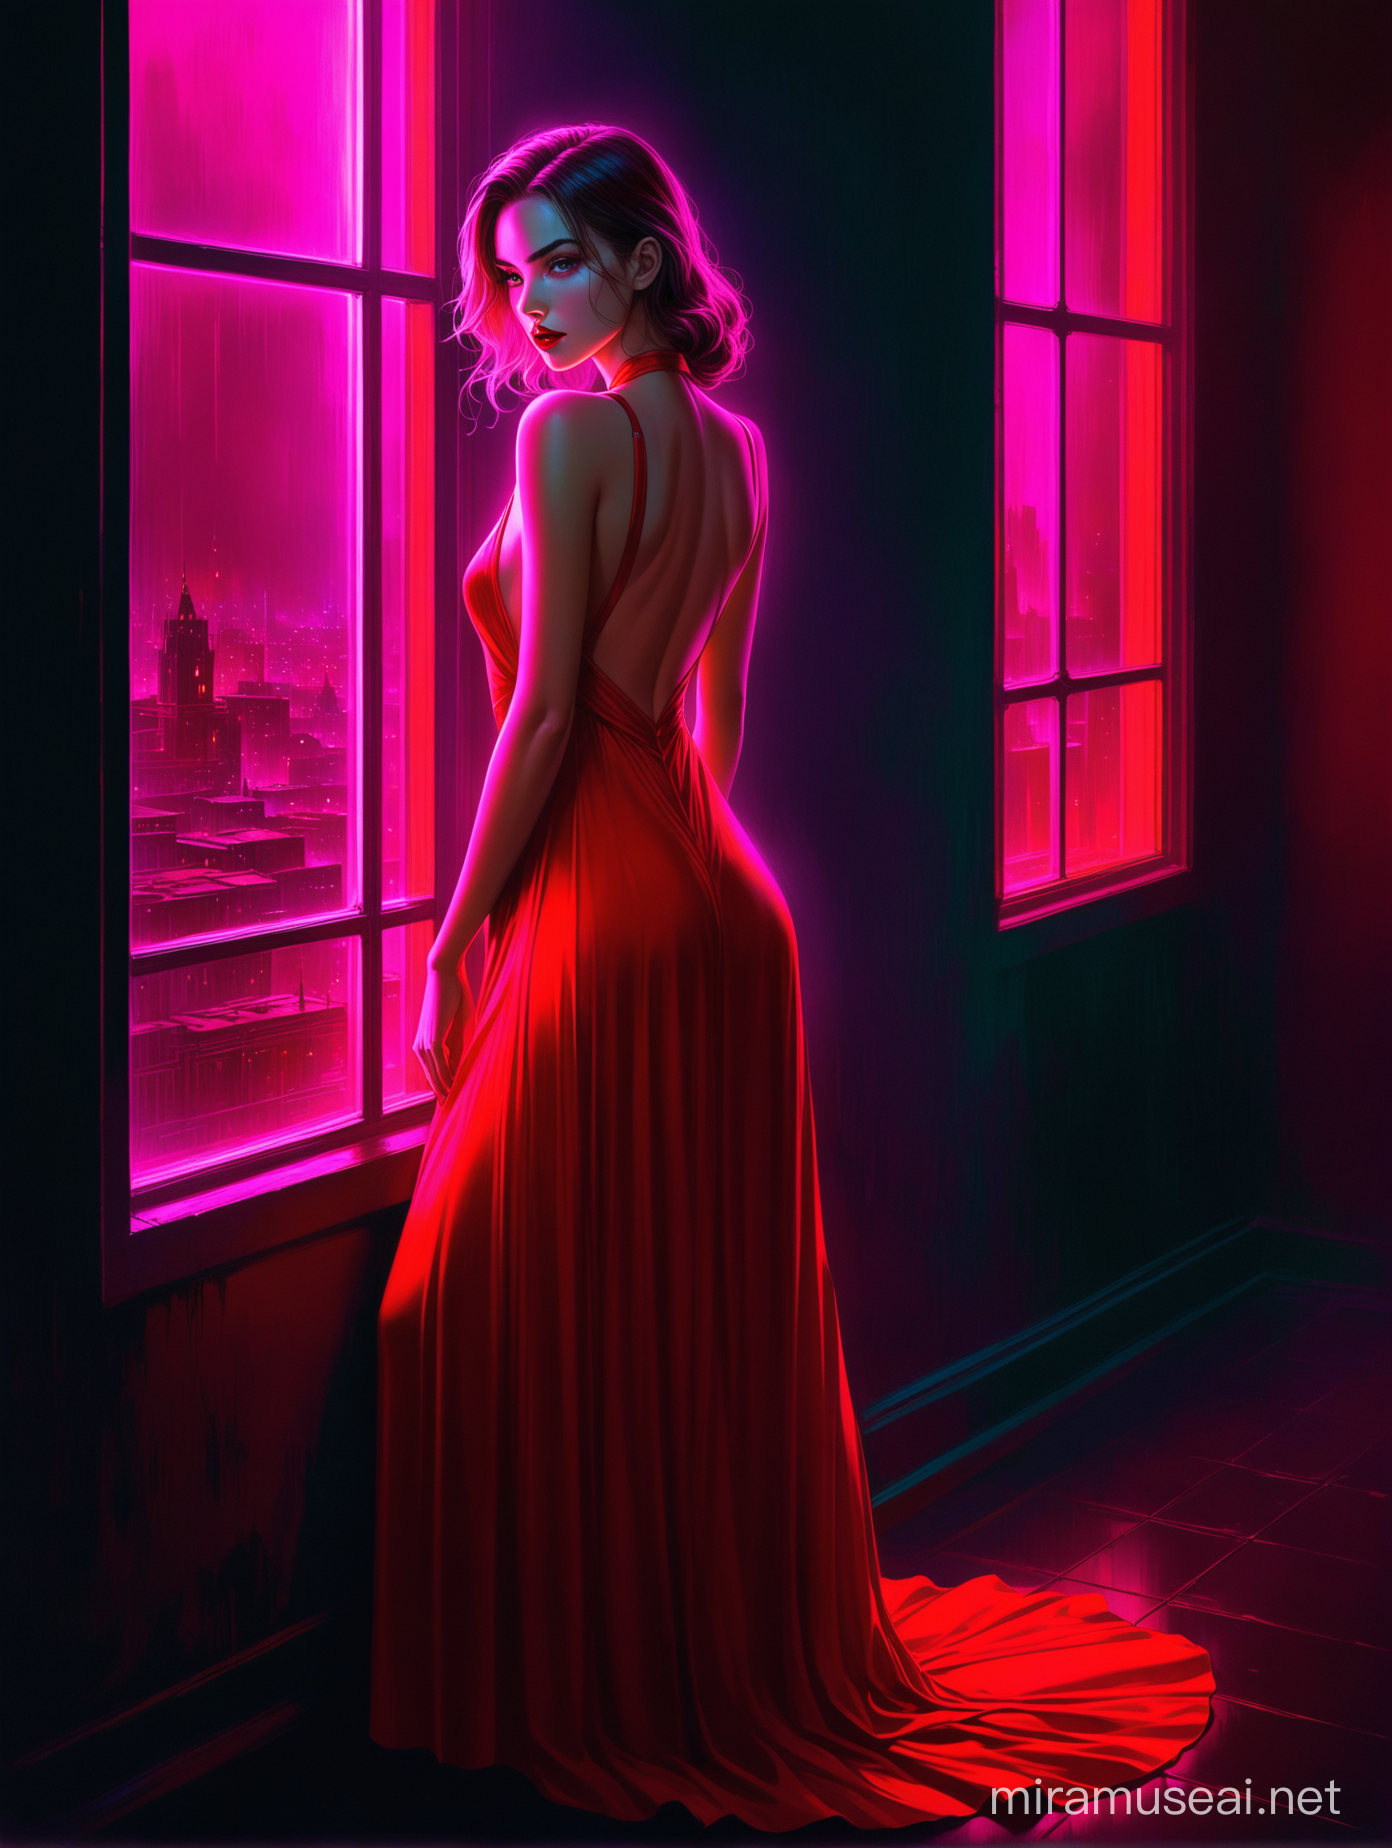 Aivision, full body of beautiful young women with a dramatic expression, prety eyes, full red lips, she is wearing red long dress Exposed back , she looks out the window anxiously , dark and gloomy environment(strong neon lighting from outside) , image realistic , Extremely detailed , intricate , beautiful , fantastic view , elegant , crispy quality Federico Bebber's expressive, fresh colors